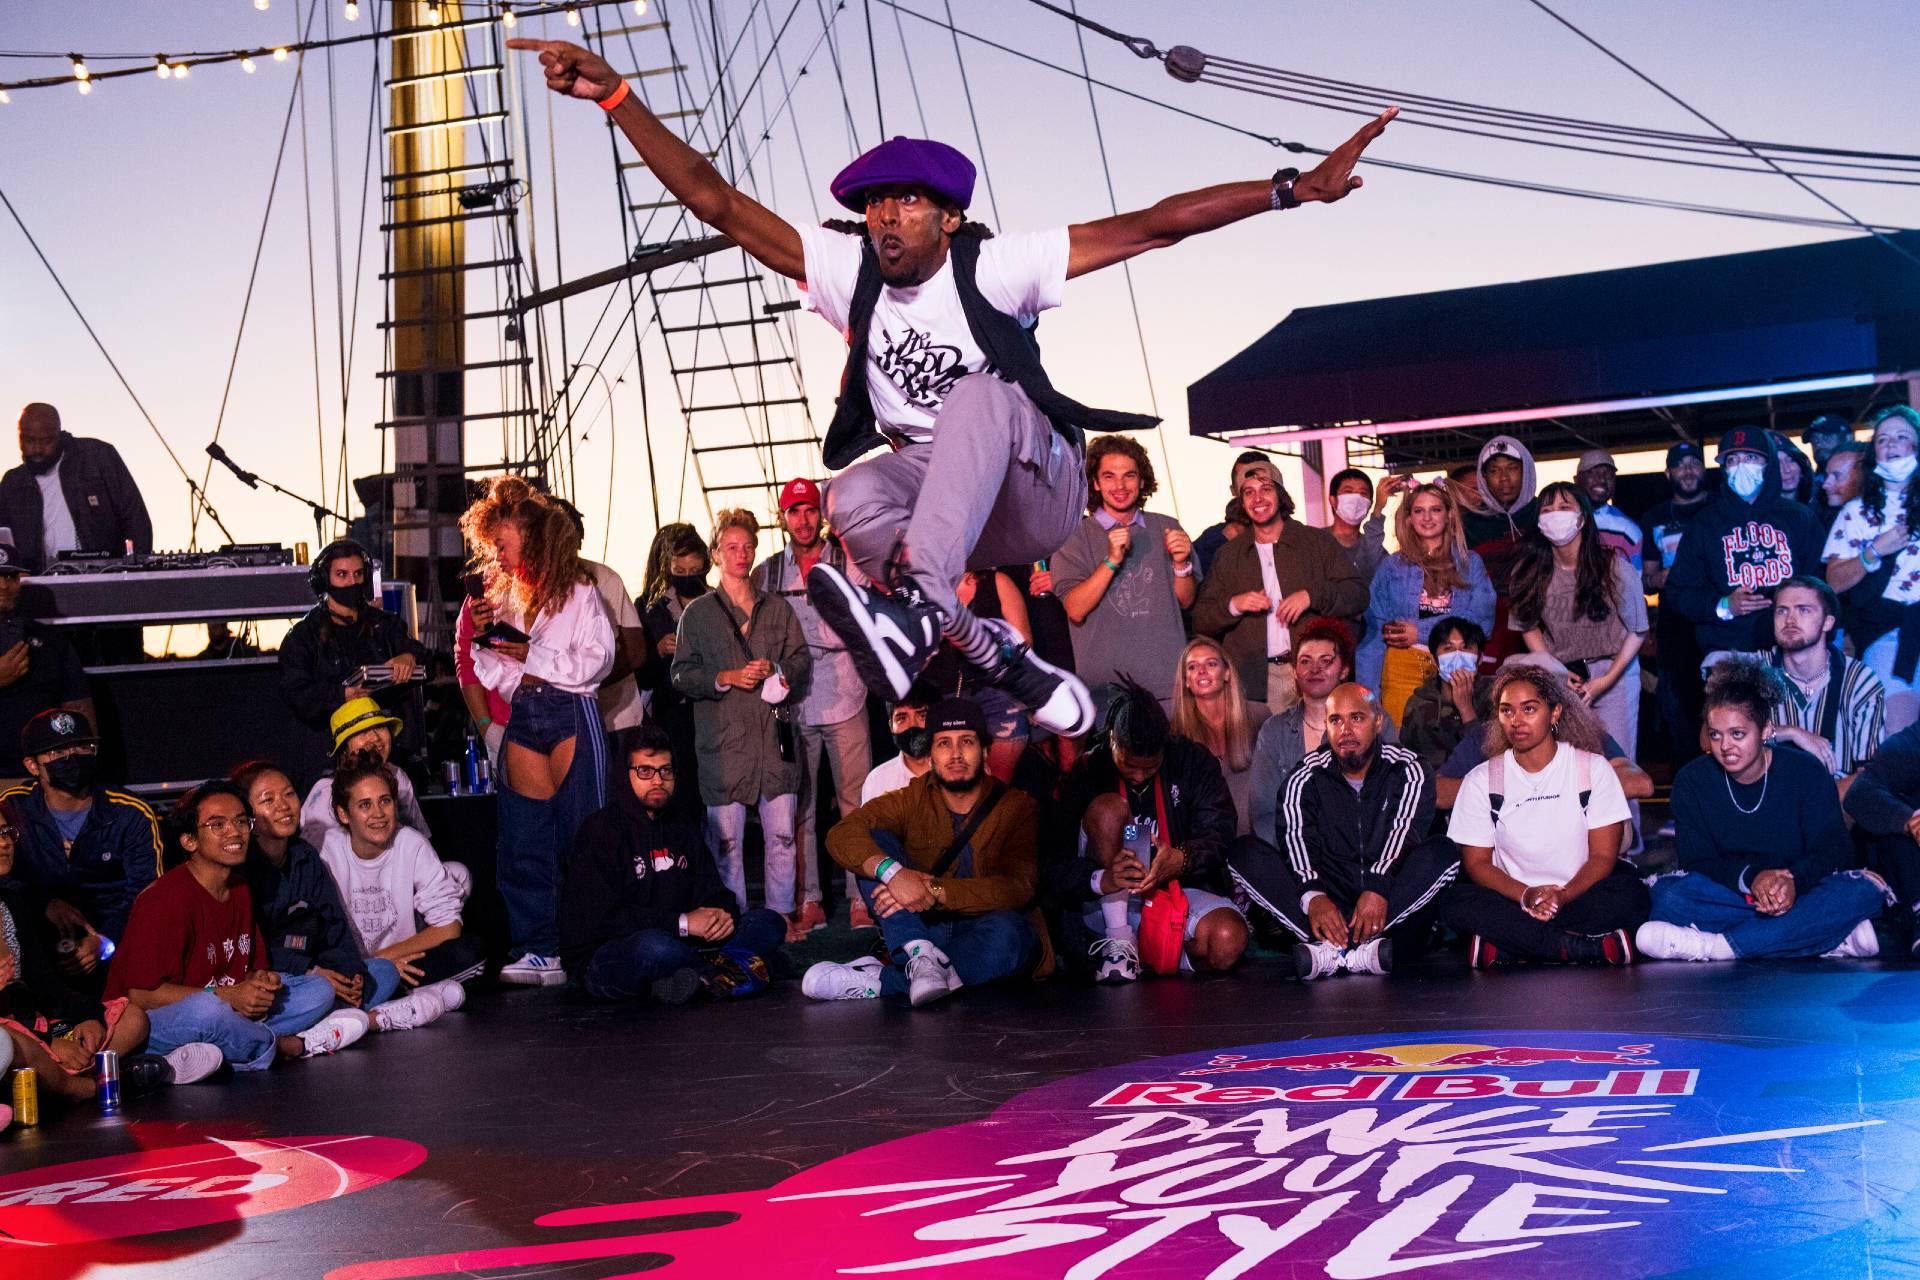 Riotthavirus competes at the Red Bull Dance Your Style qualifier in Boston on Sept. 10, 2021. (Drew Gurian / Red Bull Content Pool)